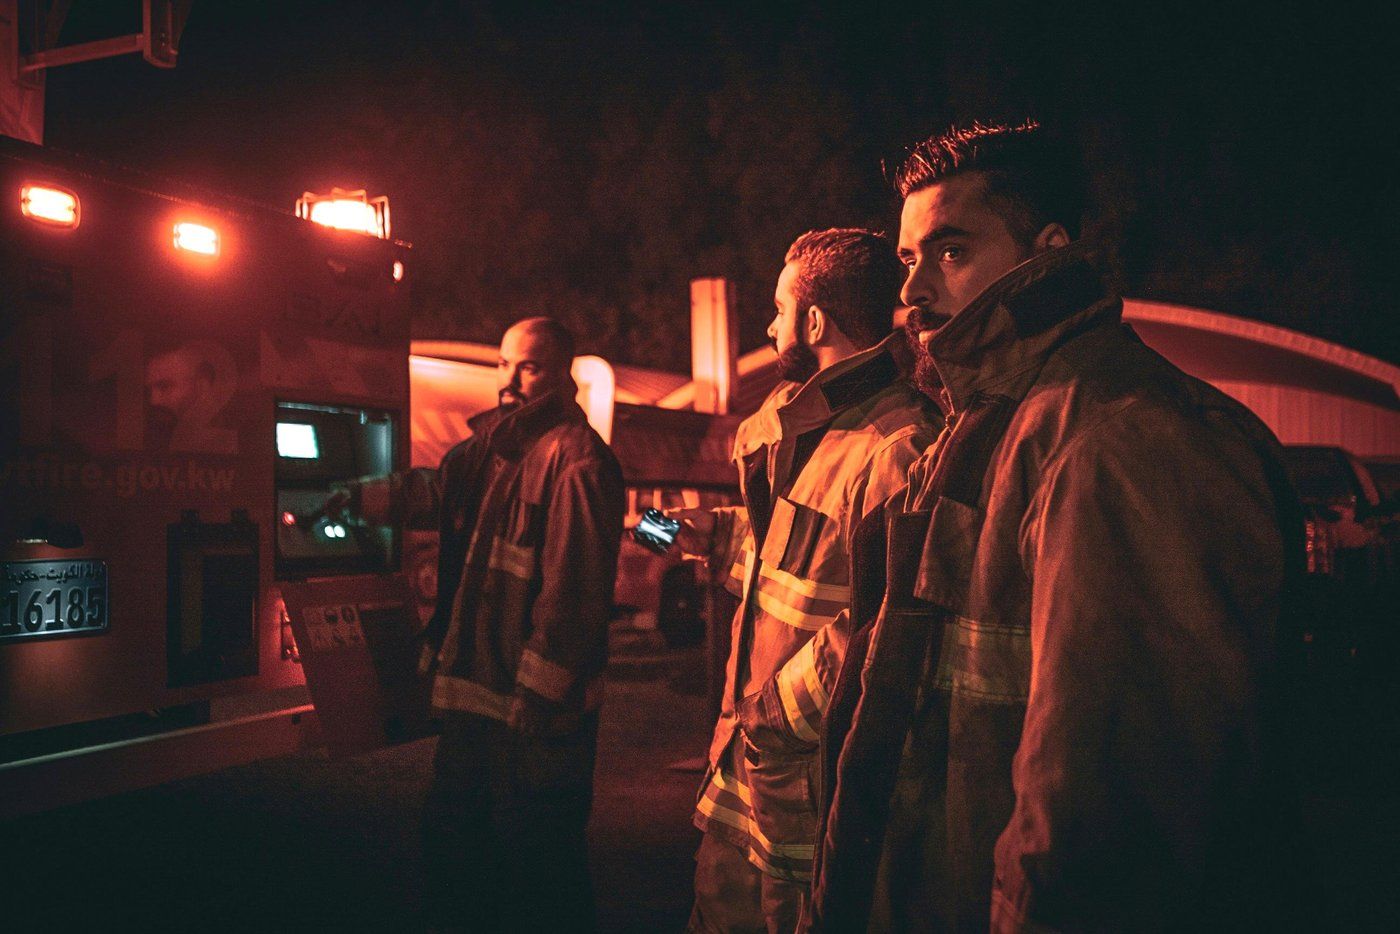 firefighters